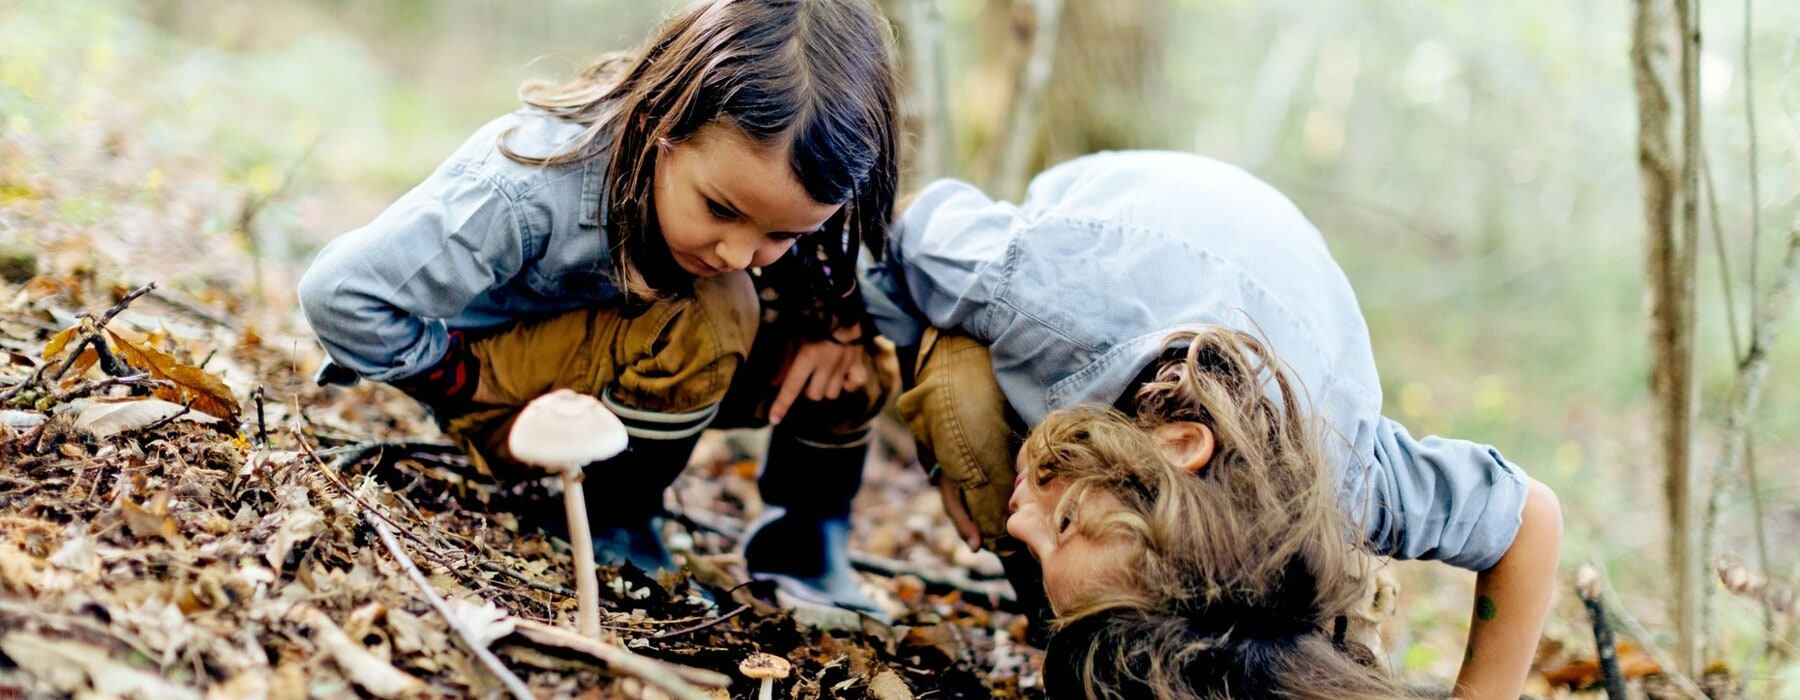 Two little girls inspecting mushrooms growing in a forest